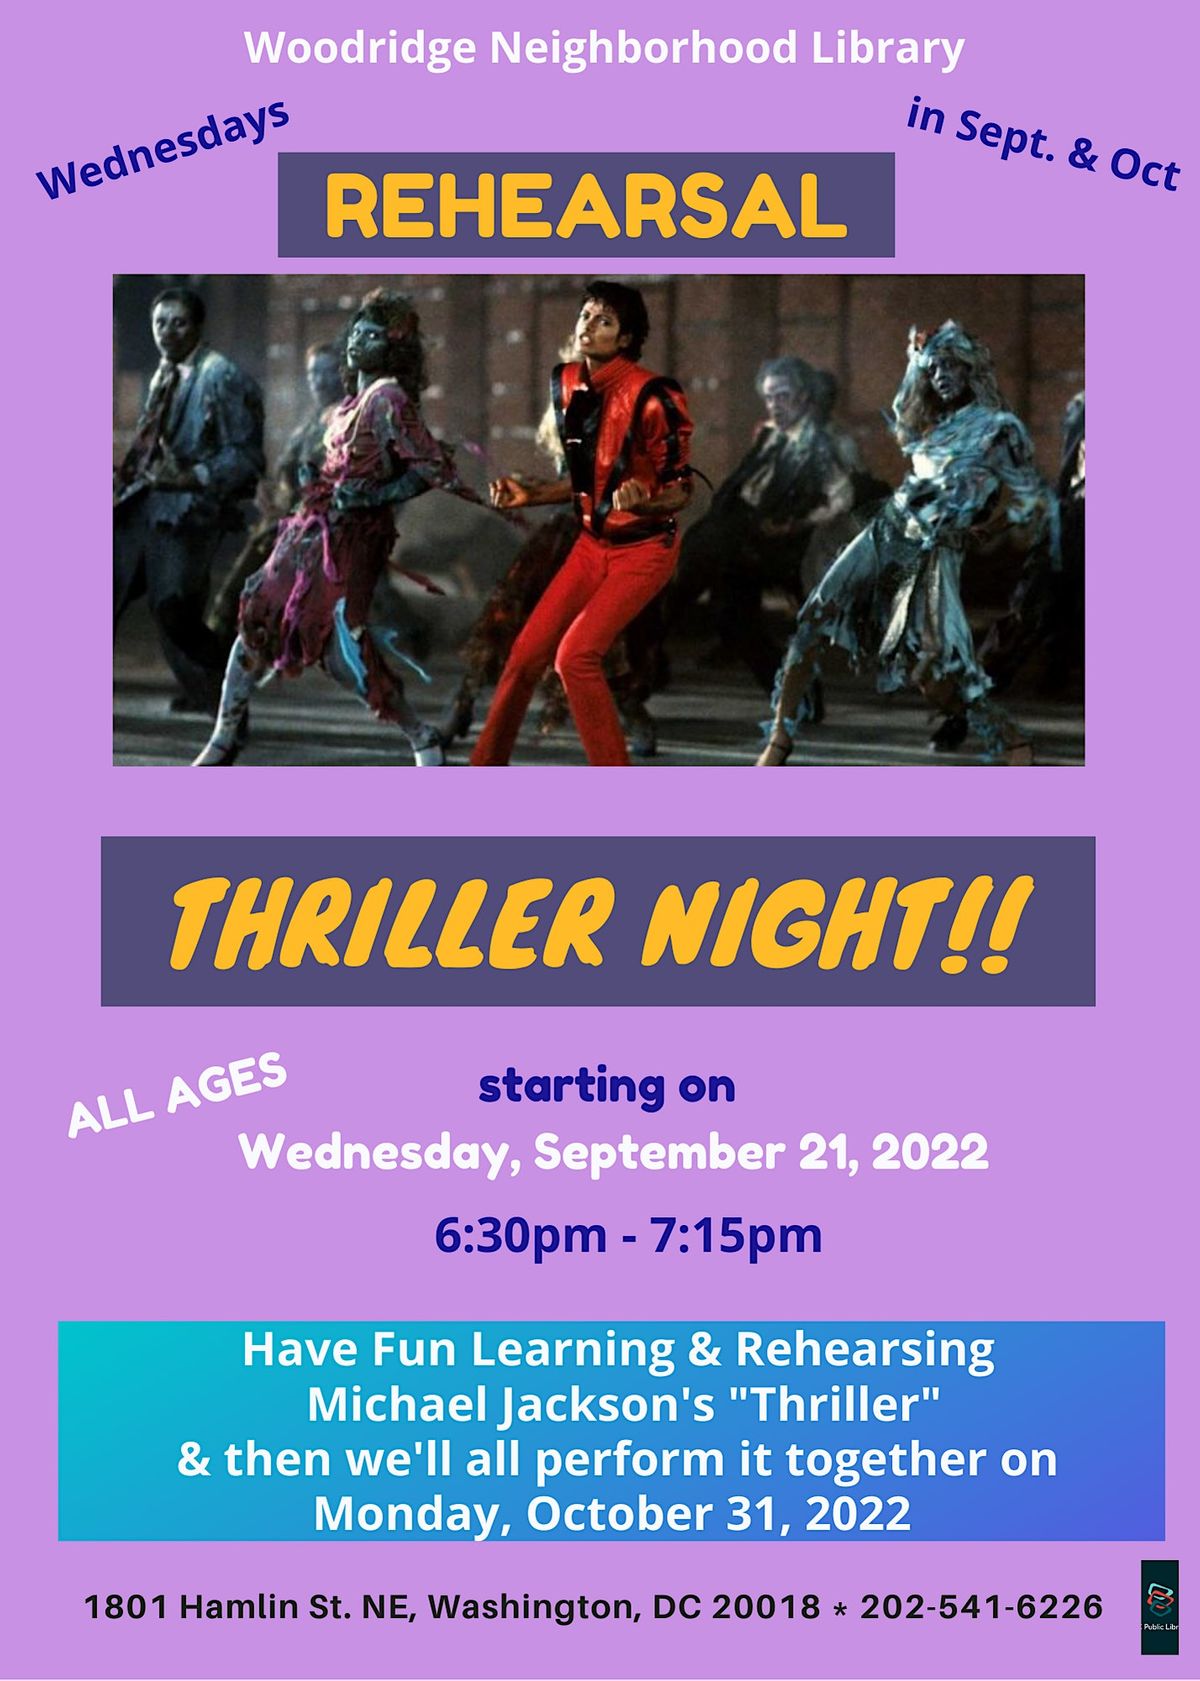 Learn and Rehearse Thriller then Perform.